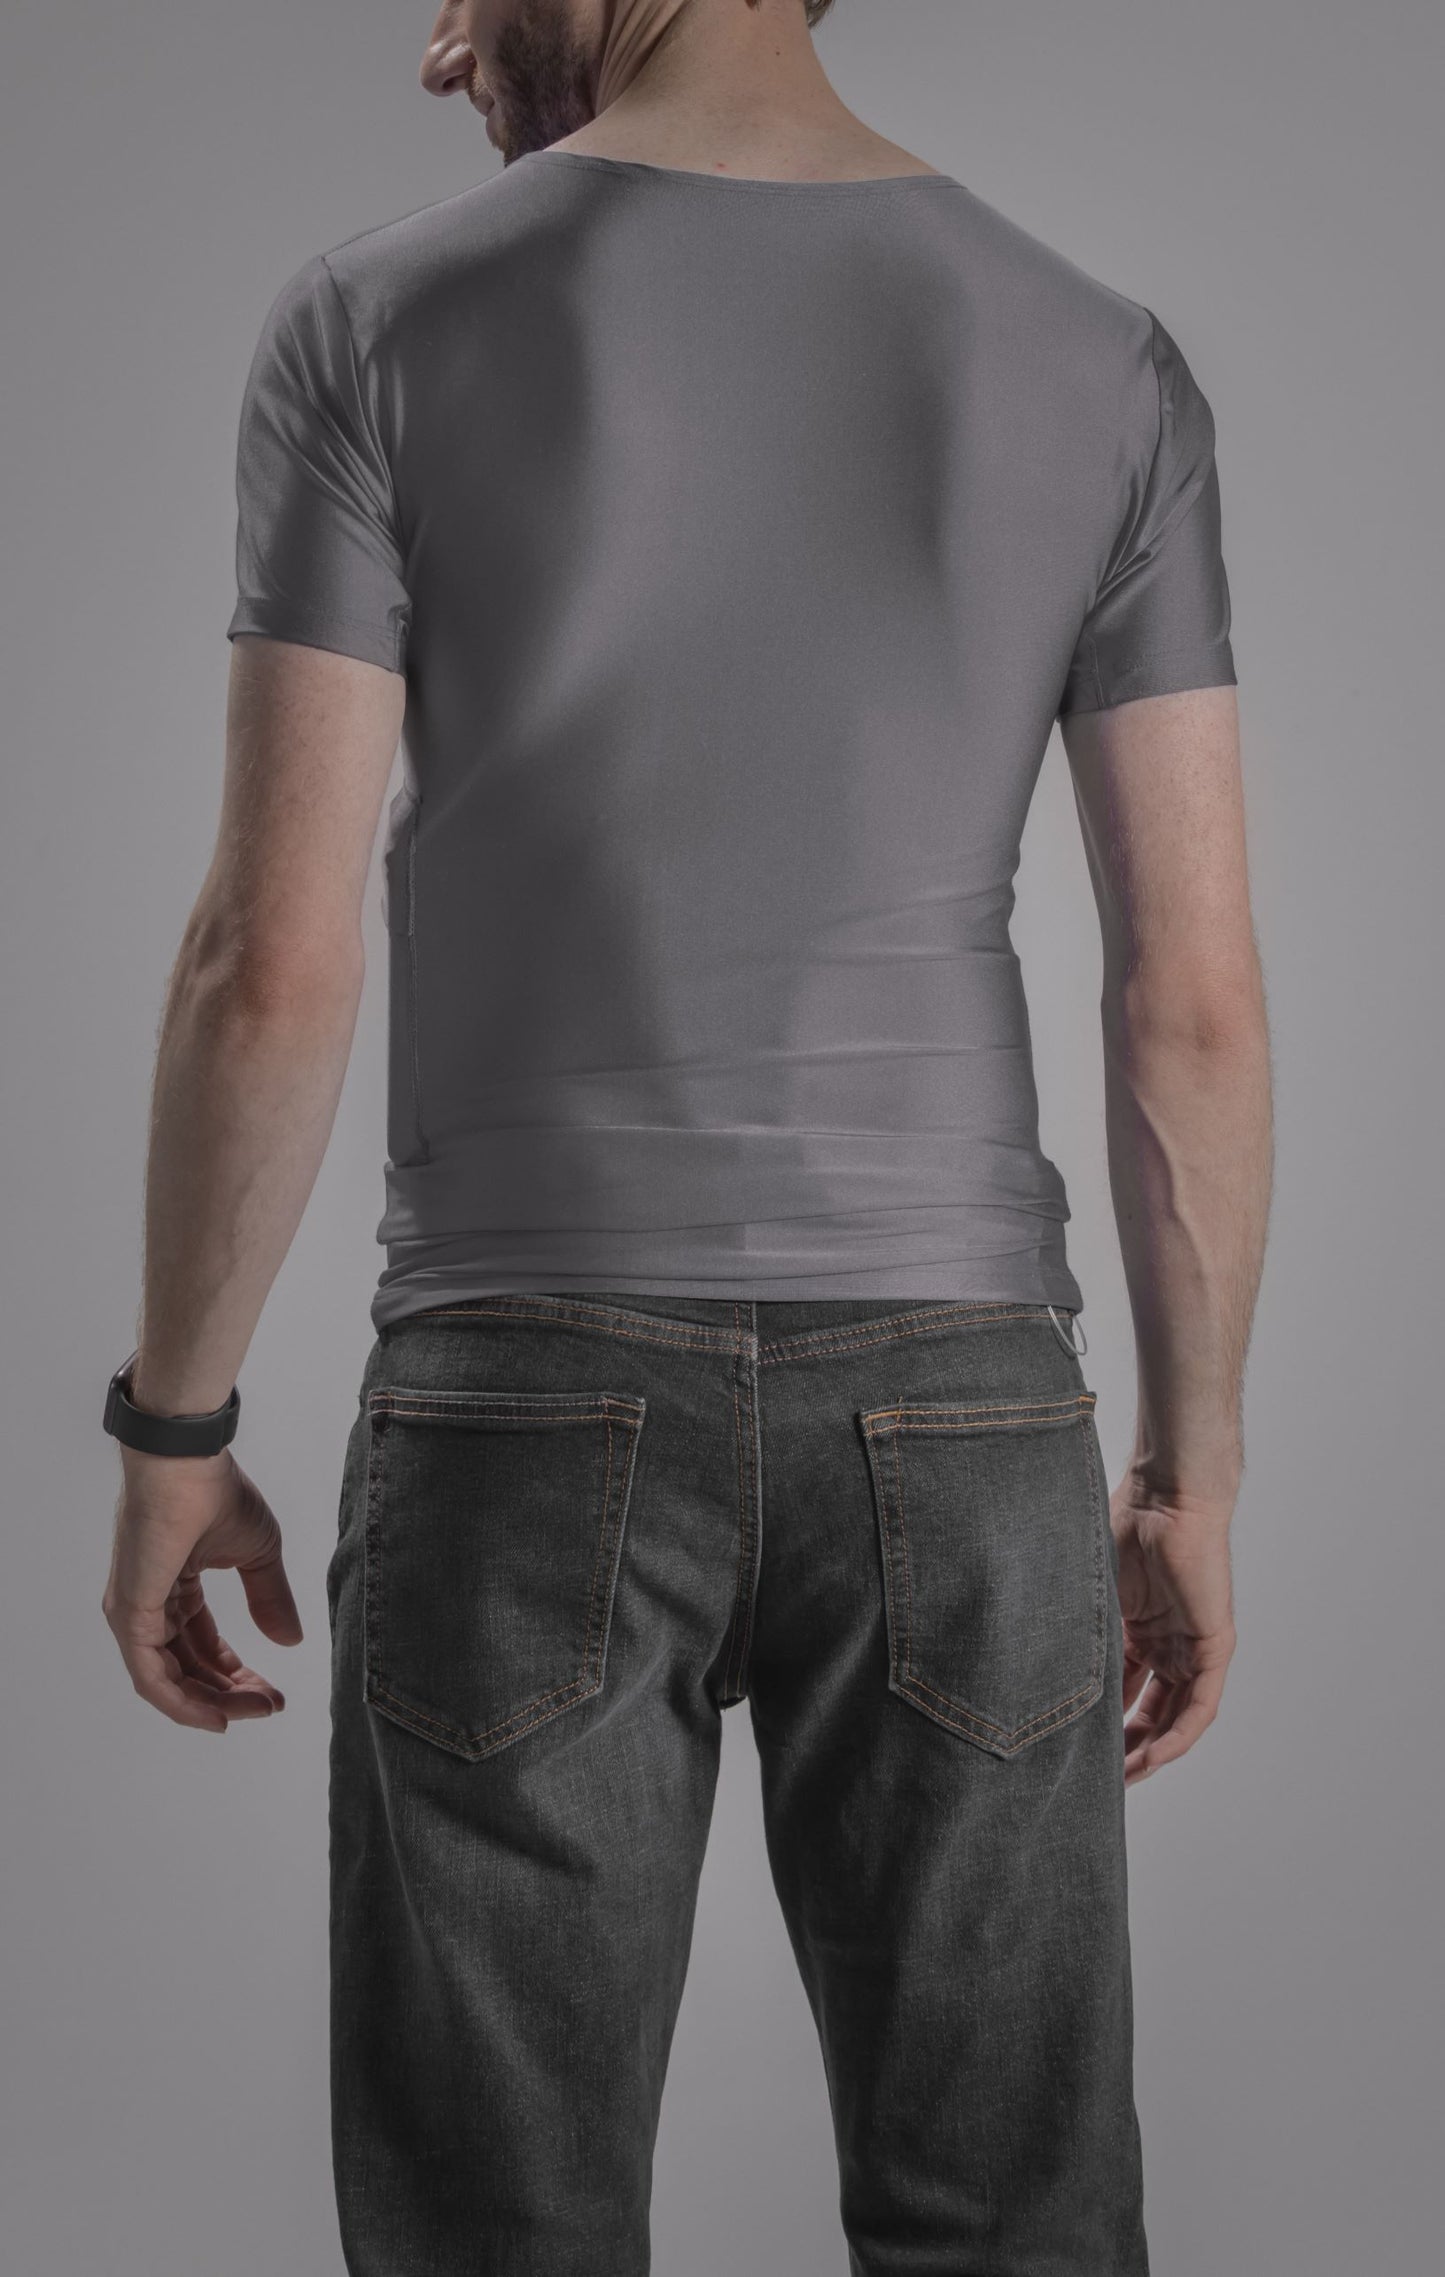 Men's Activewear Crew Neck Tee with Insulin Pump and Cell Phone Pockets